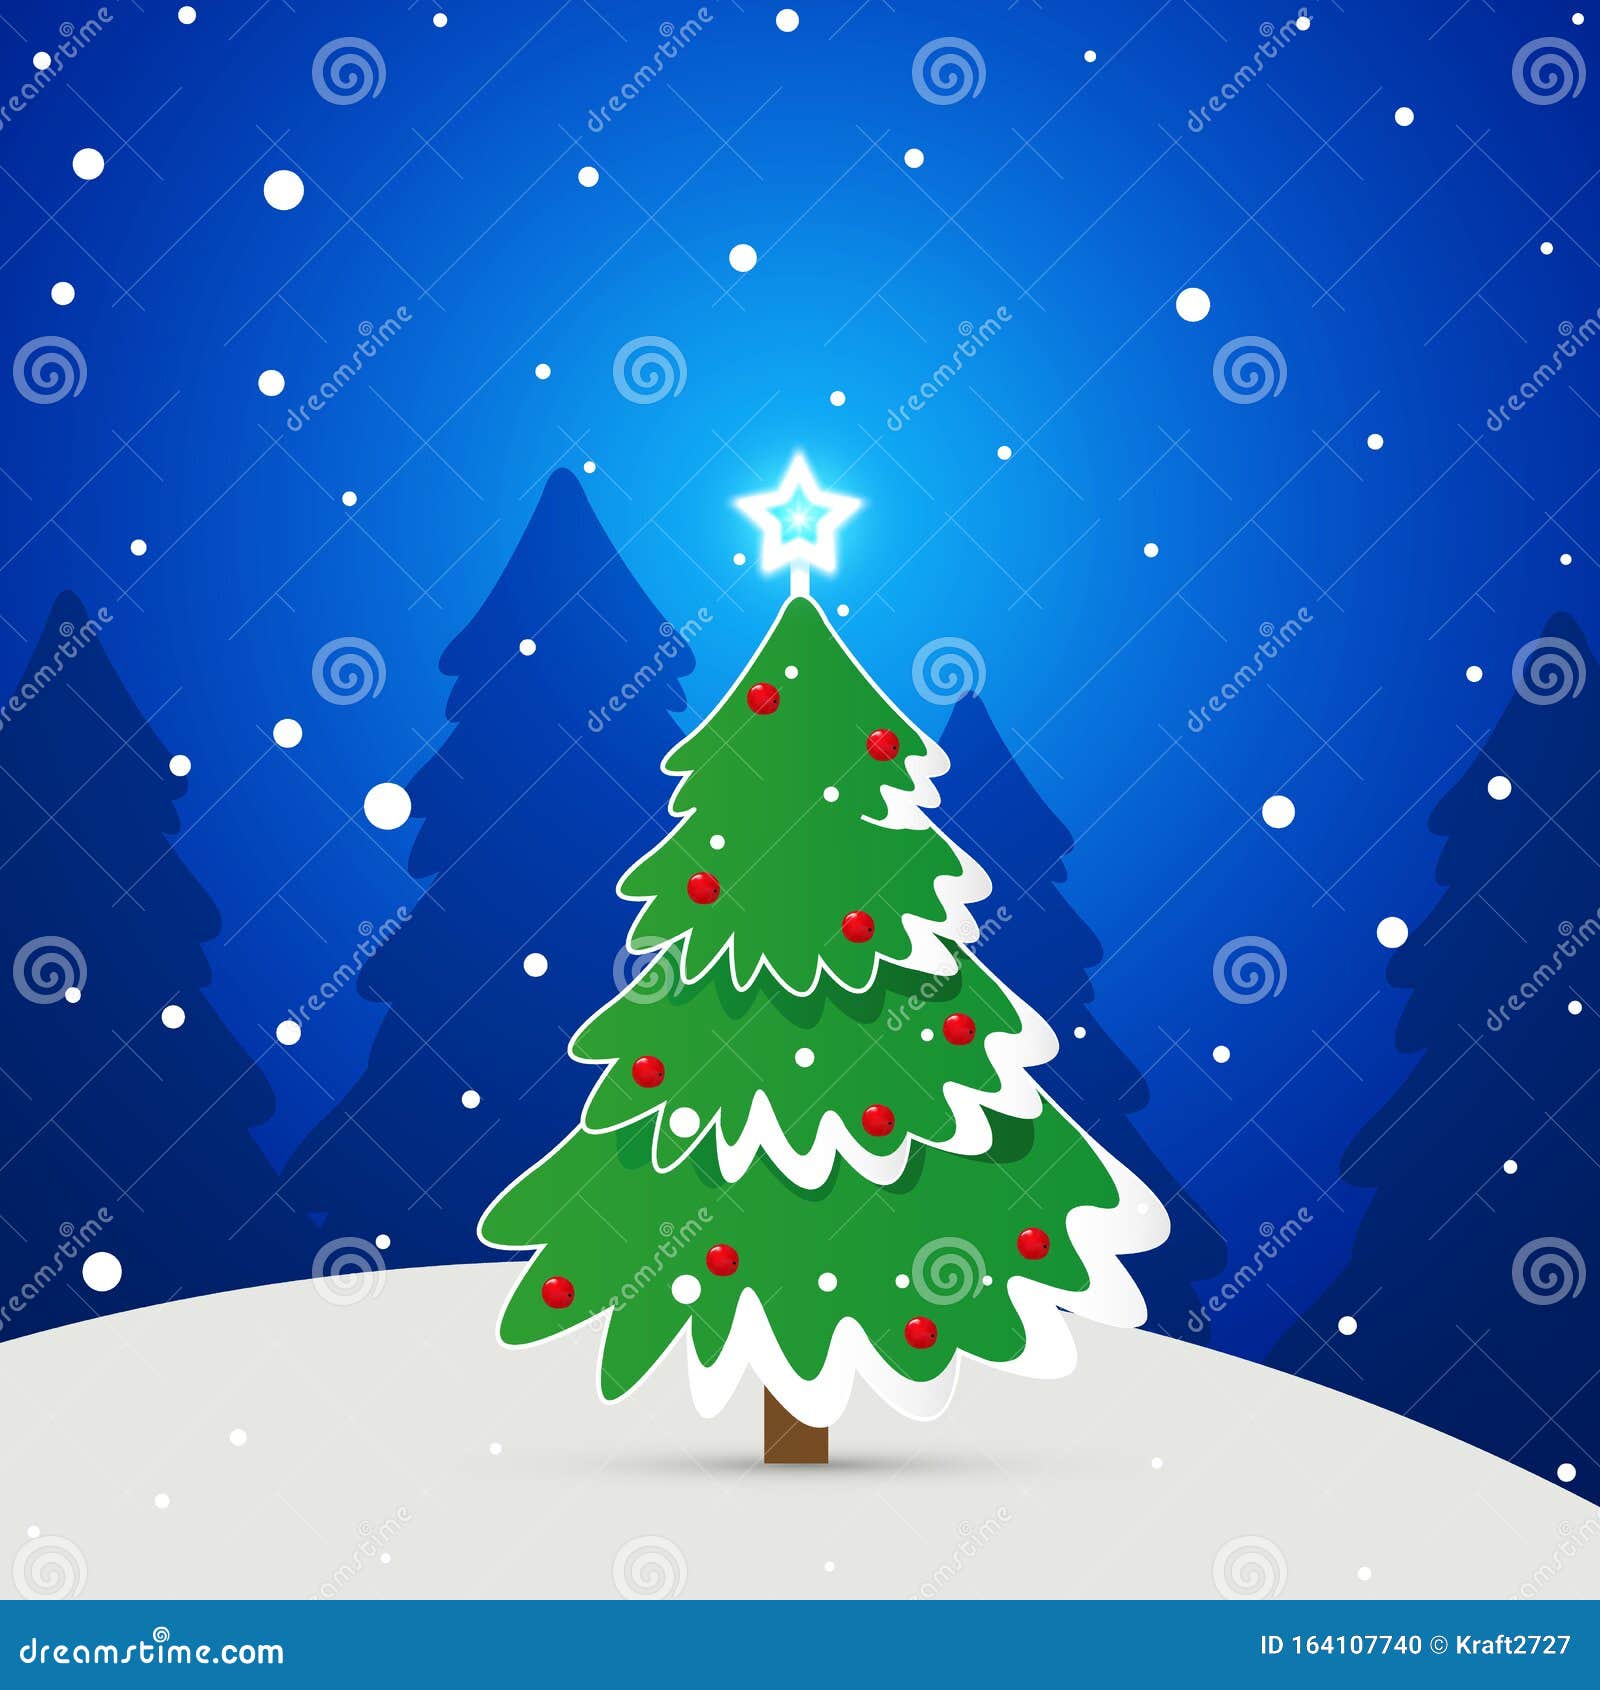 Cartoon Christmas Images Stock Illustrations – 557,796 Cartoon Christmas  Images Stock Illustrations, Vectors & Clipart - Dreamstime